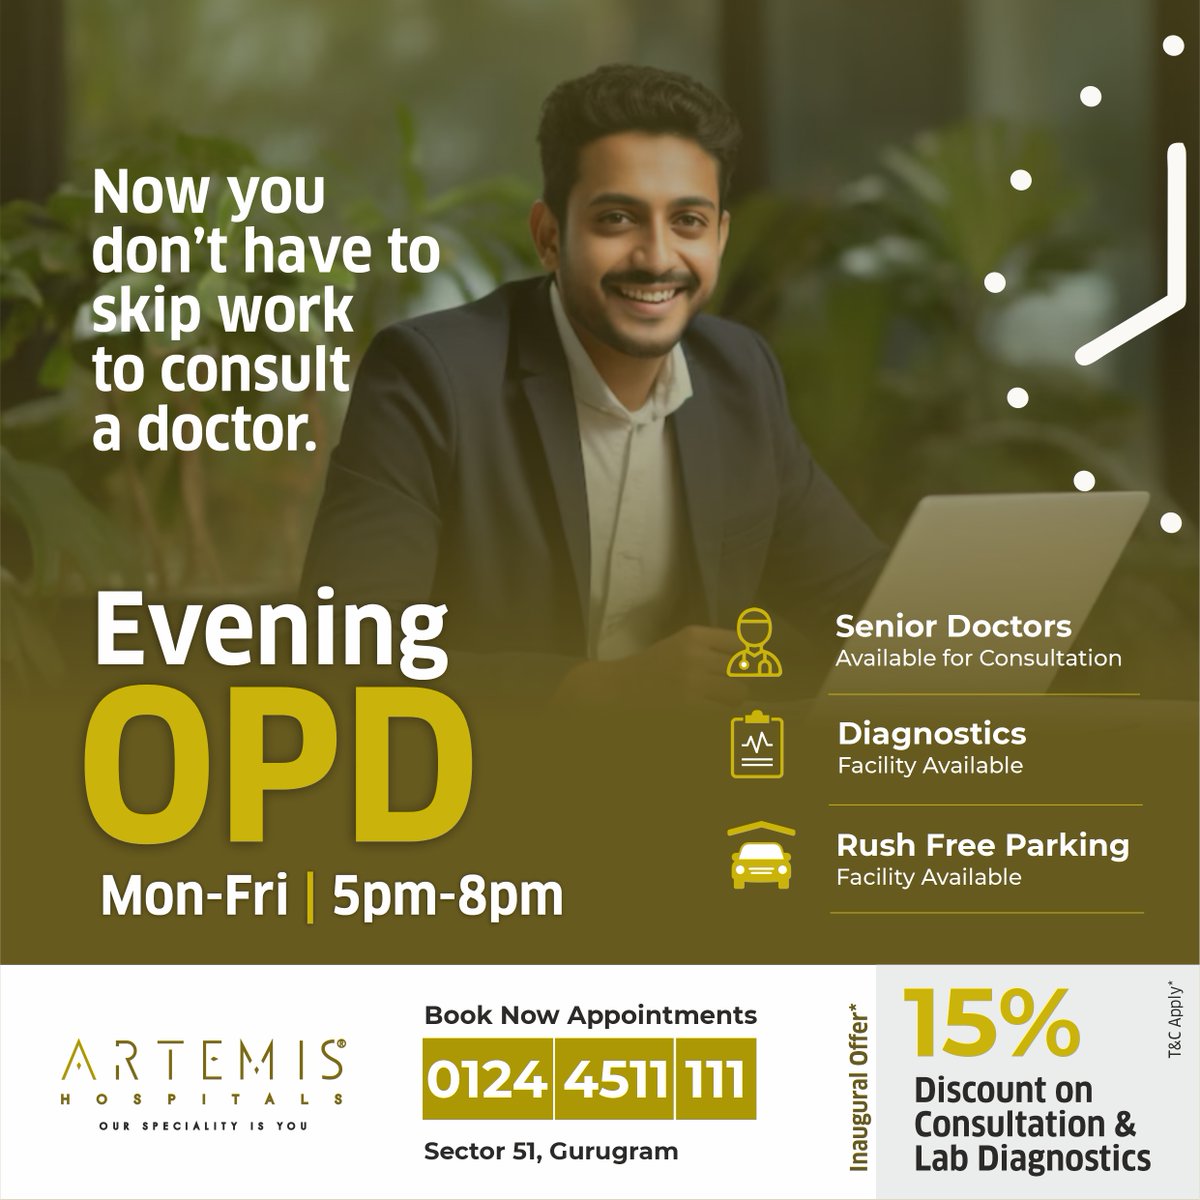 Looking for an evening doctor consultation in Gurugram? Artemis Hospitals is now offering evening OPD consultations with senior doctors from 5pm to 8pm, Monday to Friday. #Gurugram #EveningDoctorConsultation #hospitals #hospitalityexcellence #GurgaonNews #Gurugramnews